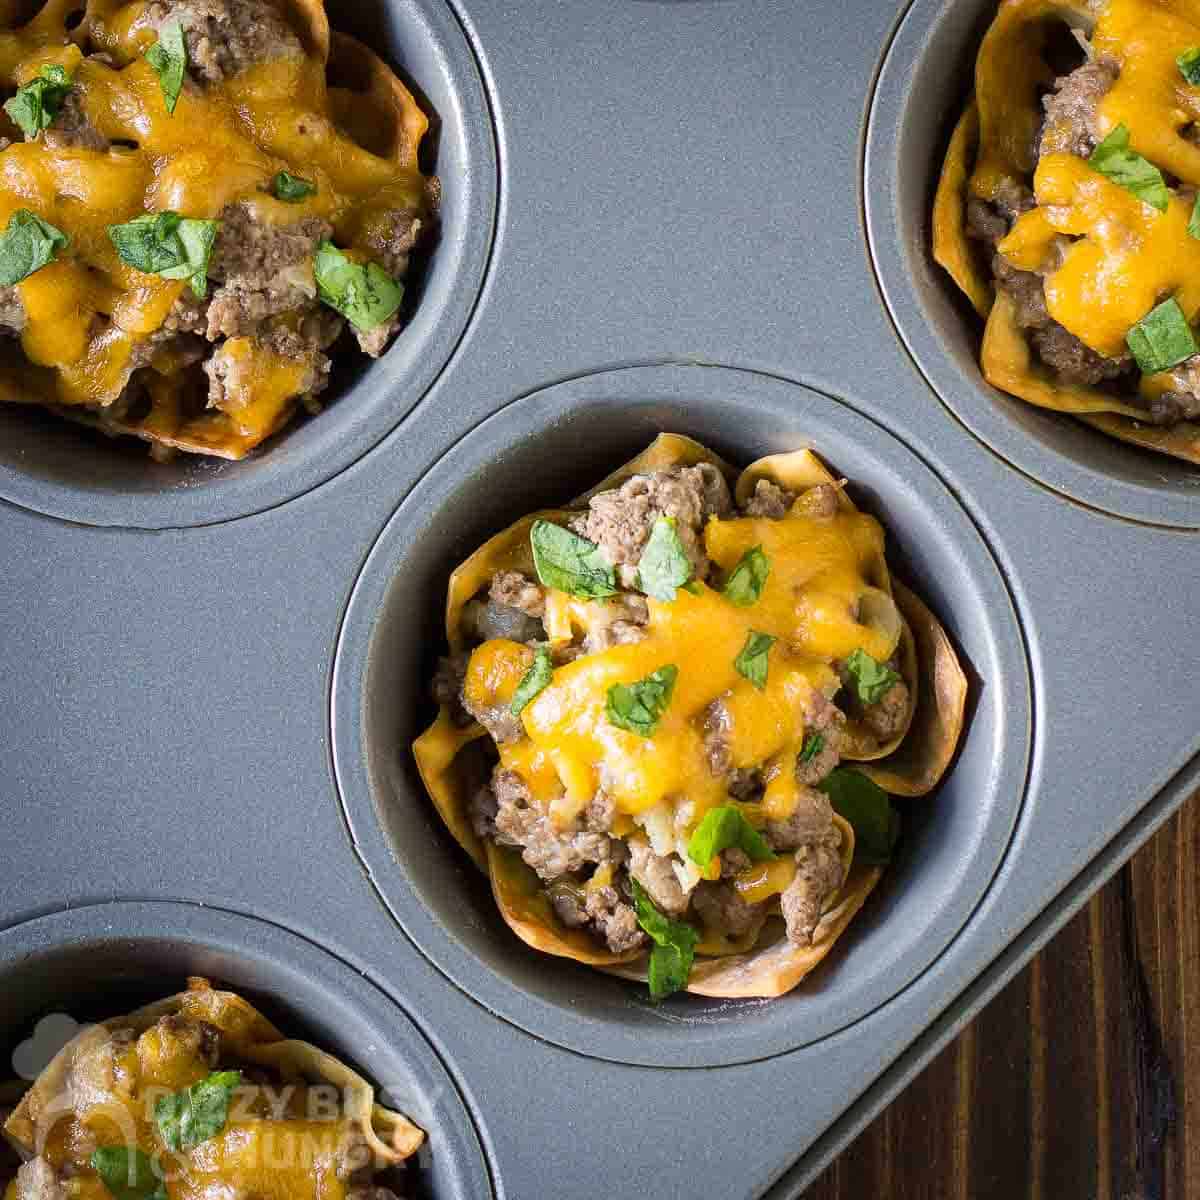 Overhead shot of multiple wonton cheeseburger cups in a cupcake sheet on a wooden surface.